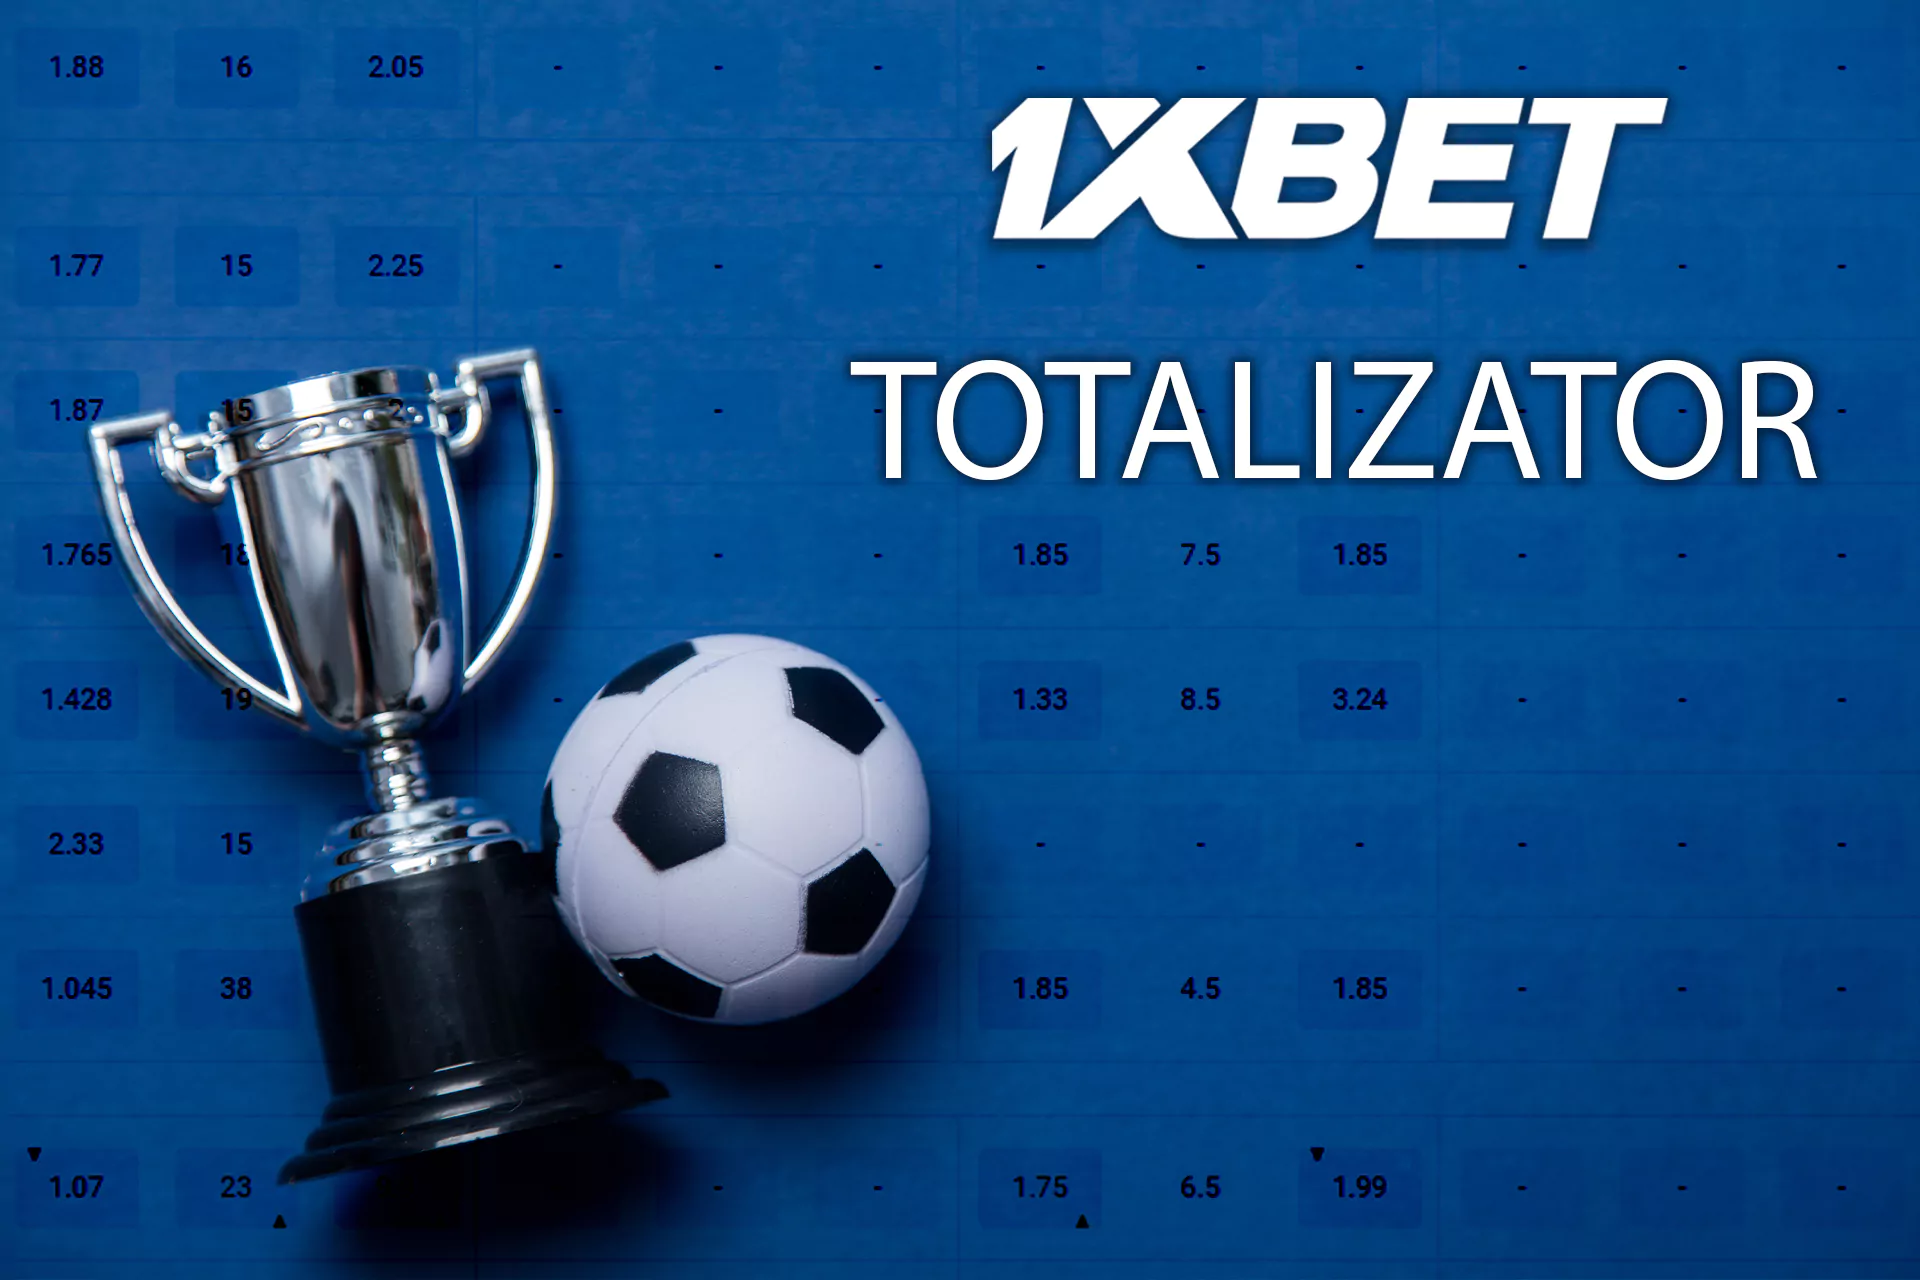 Try the totalizator 1xBet for comfortable betting on sports.